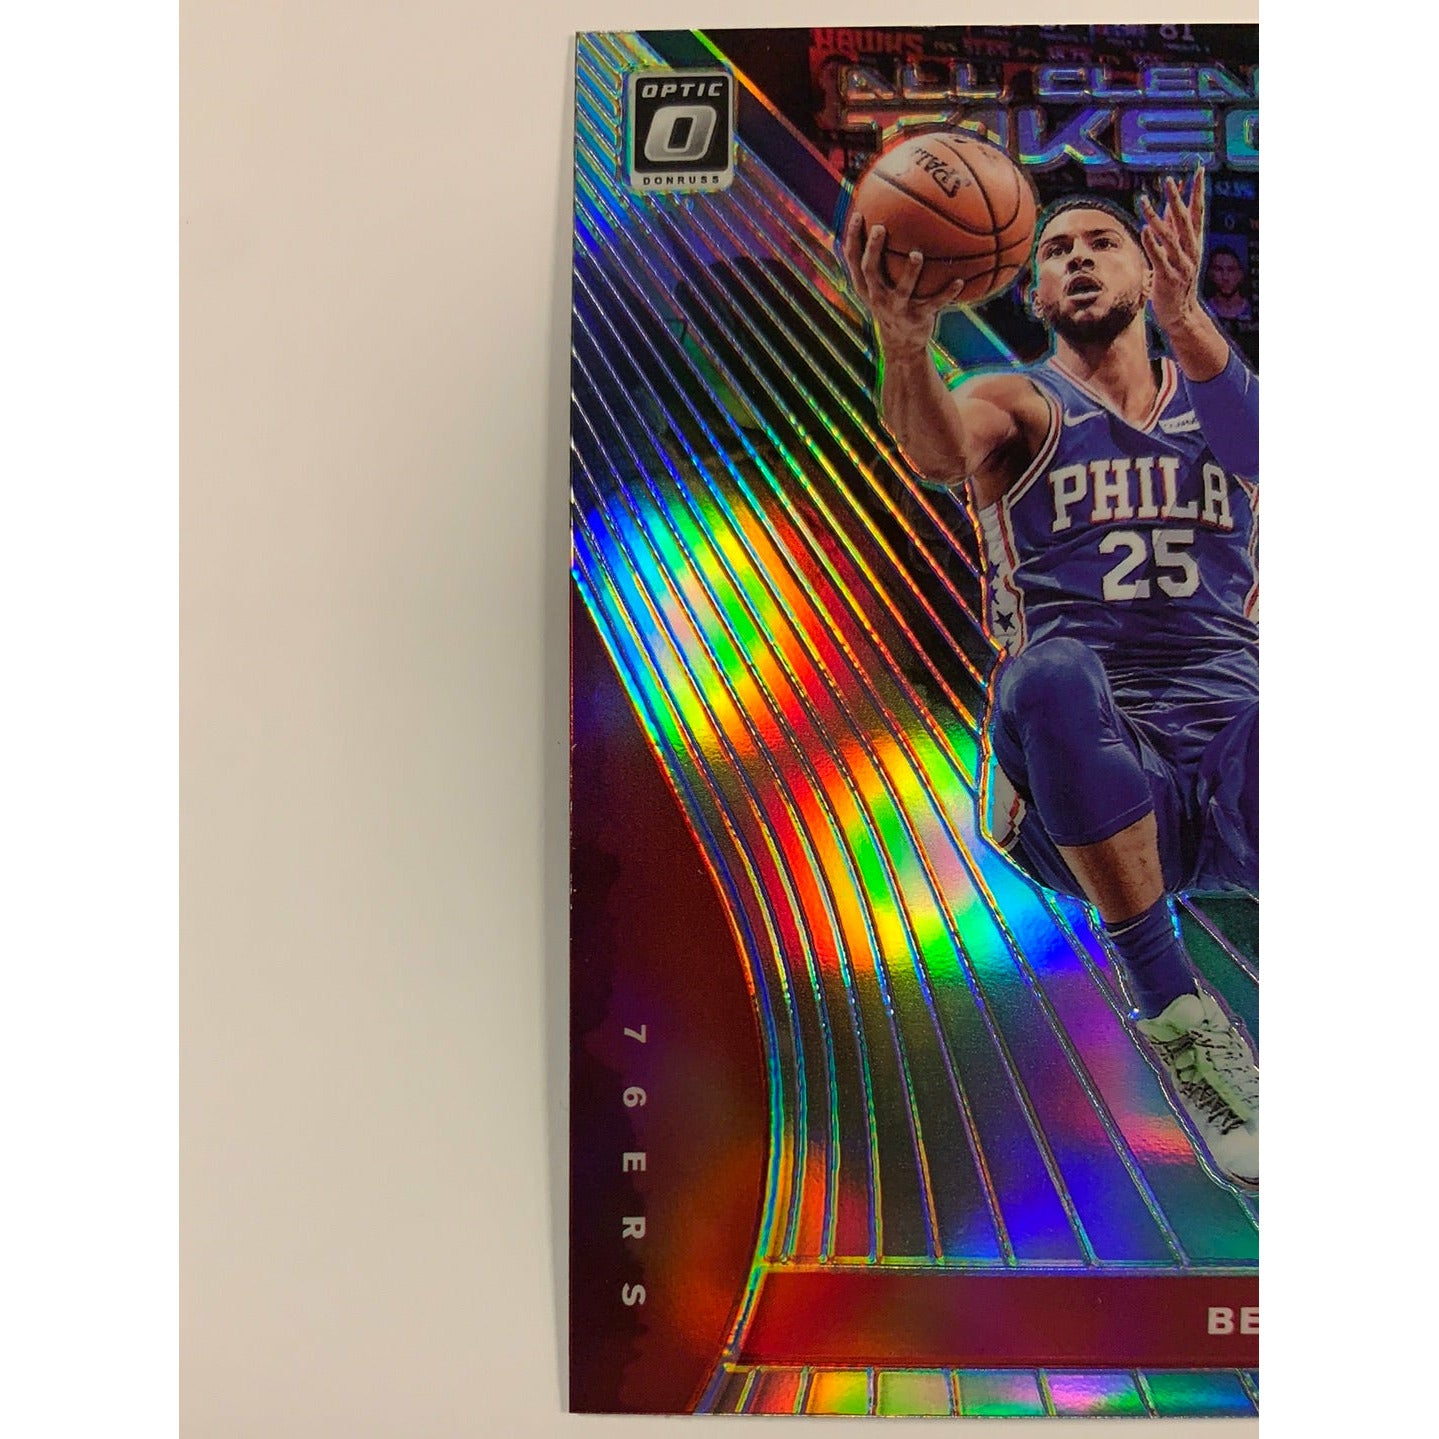  2019-20 Donruss Optic Ben Simmons All Clear For Takeoff Holo Silver Prizm  Local Legends Cards & Collectibles